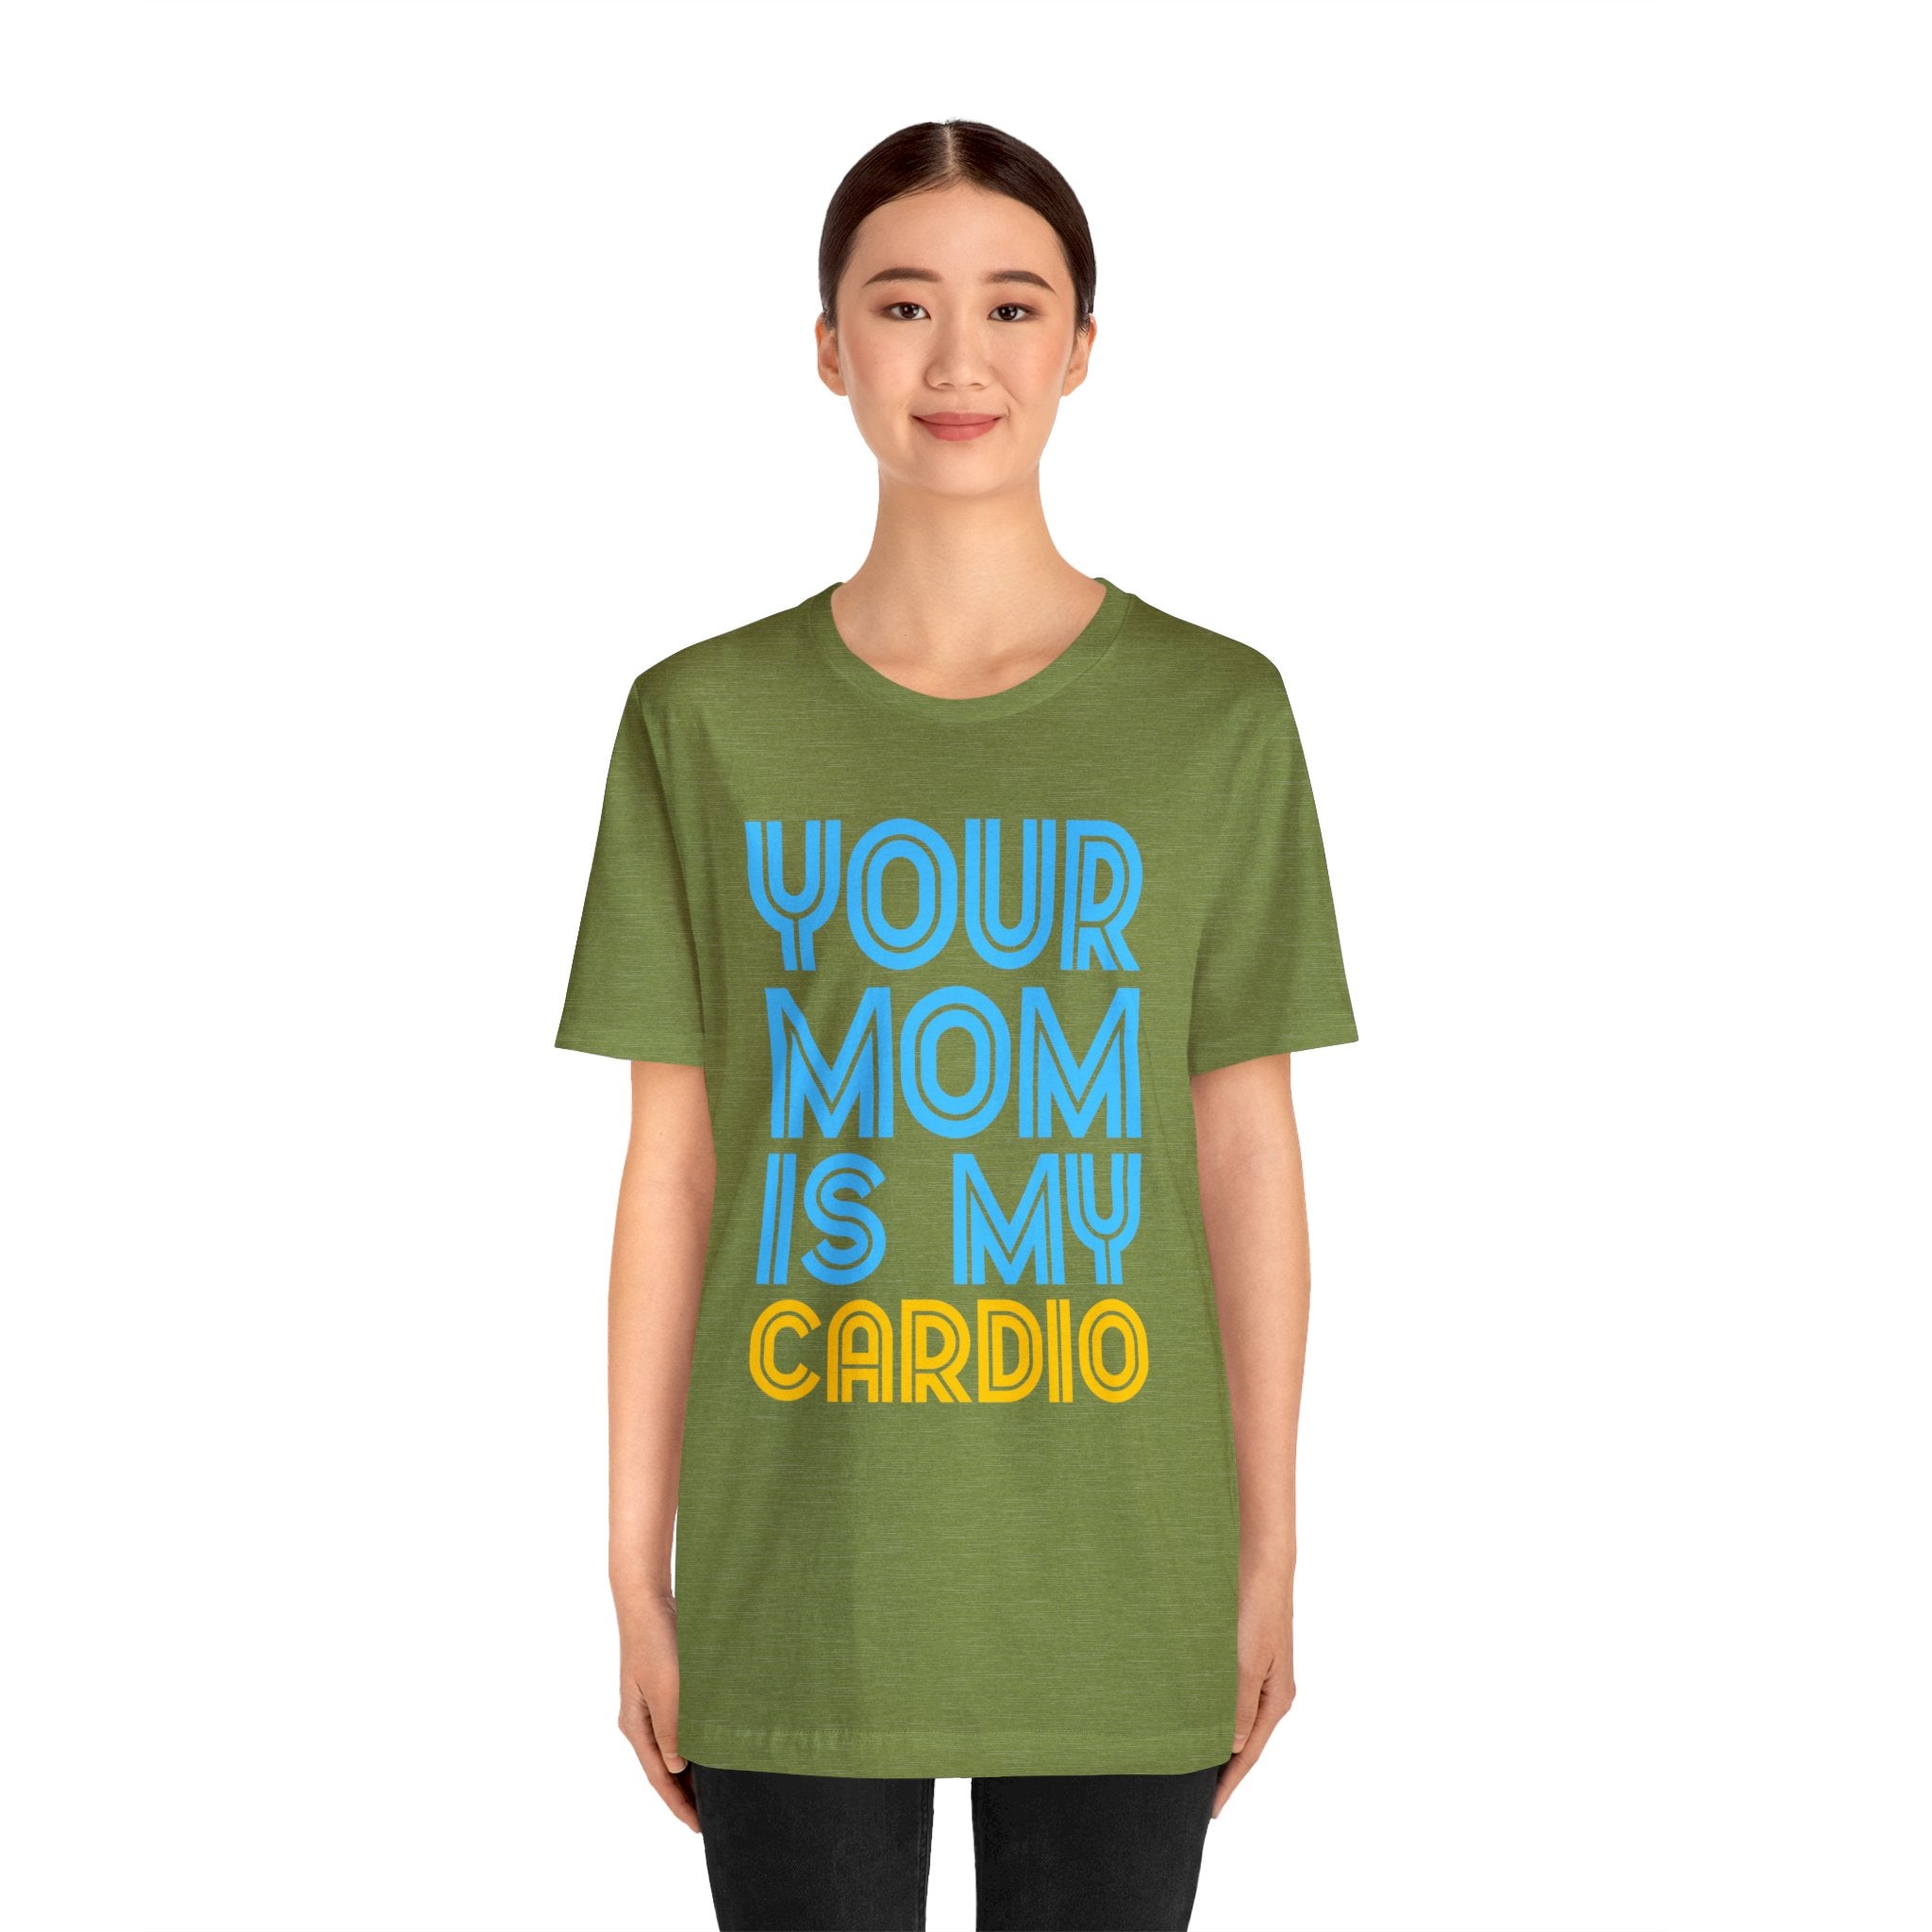 Order this "Your Mother Is My Cardio" unisex t-shirt and start waiting for its arrival.